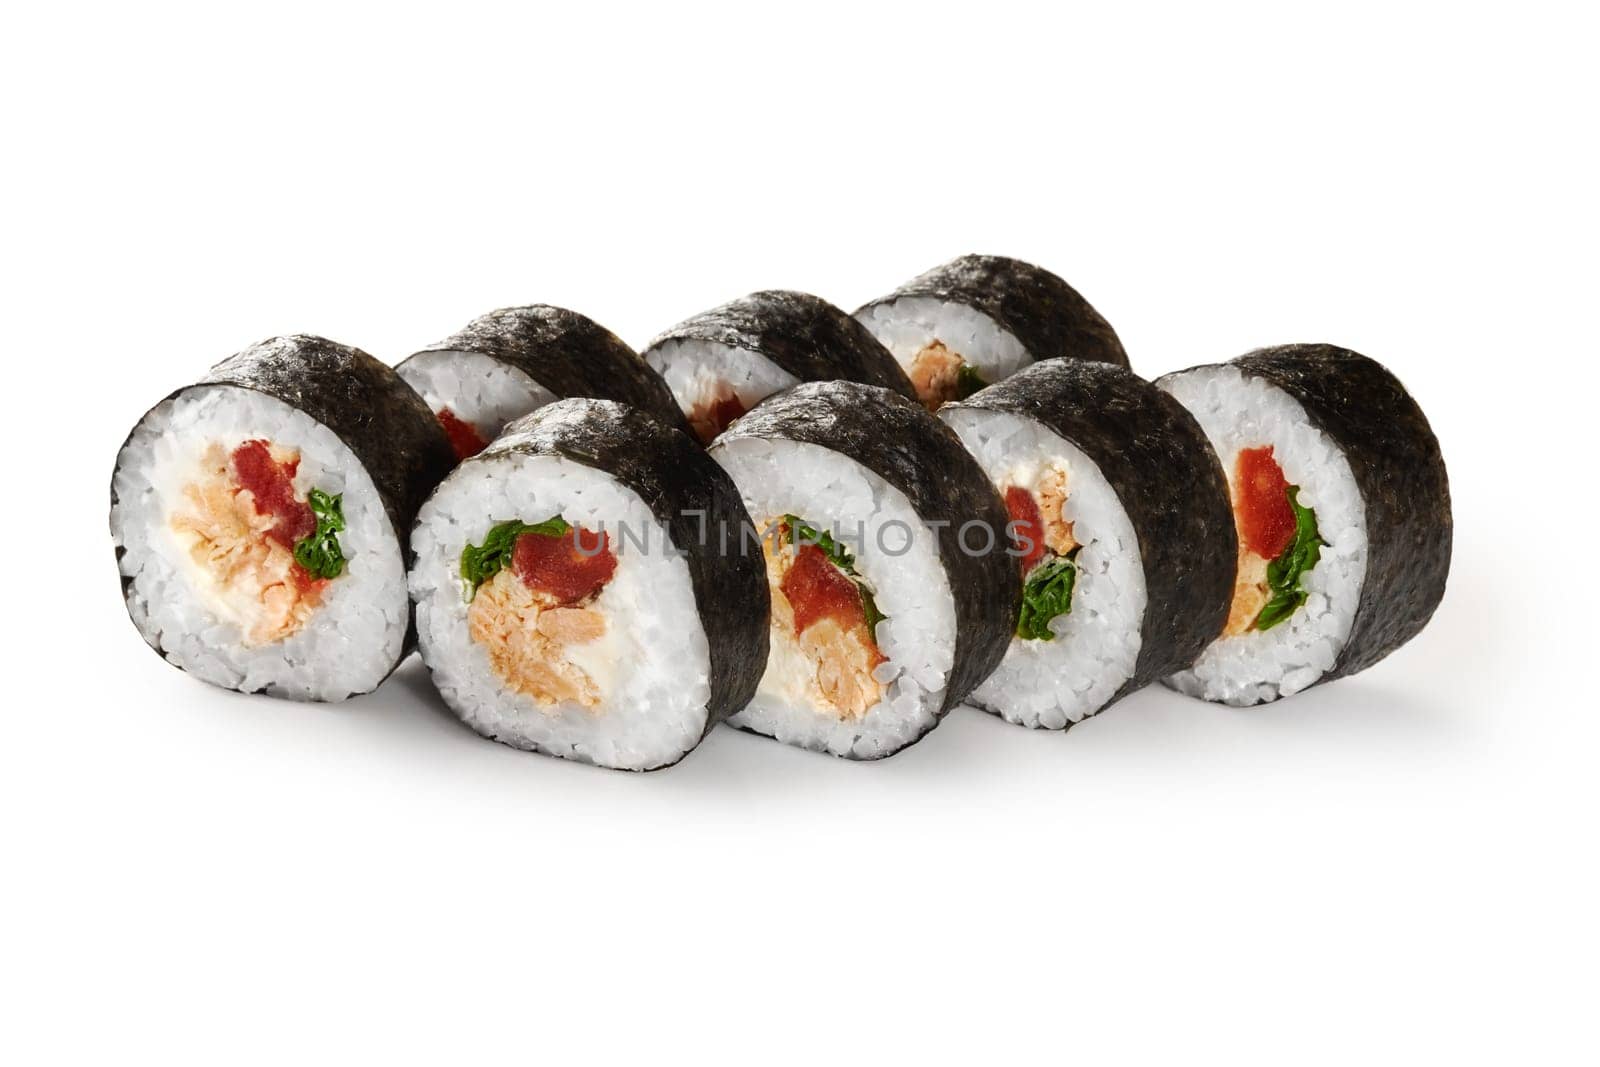 Delicious futomaki rolls with baked salmon, chopped tomatoes, scallions and cream cheese presented on white background. Popular Japanese snack